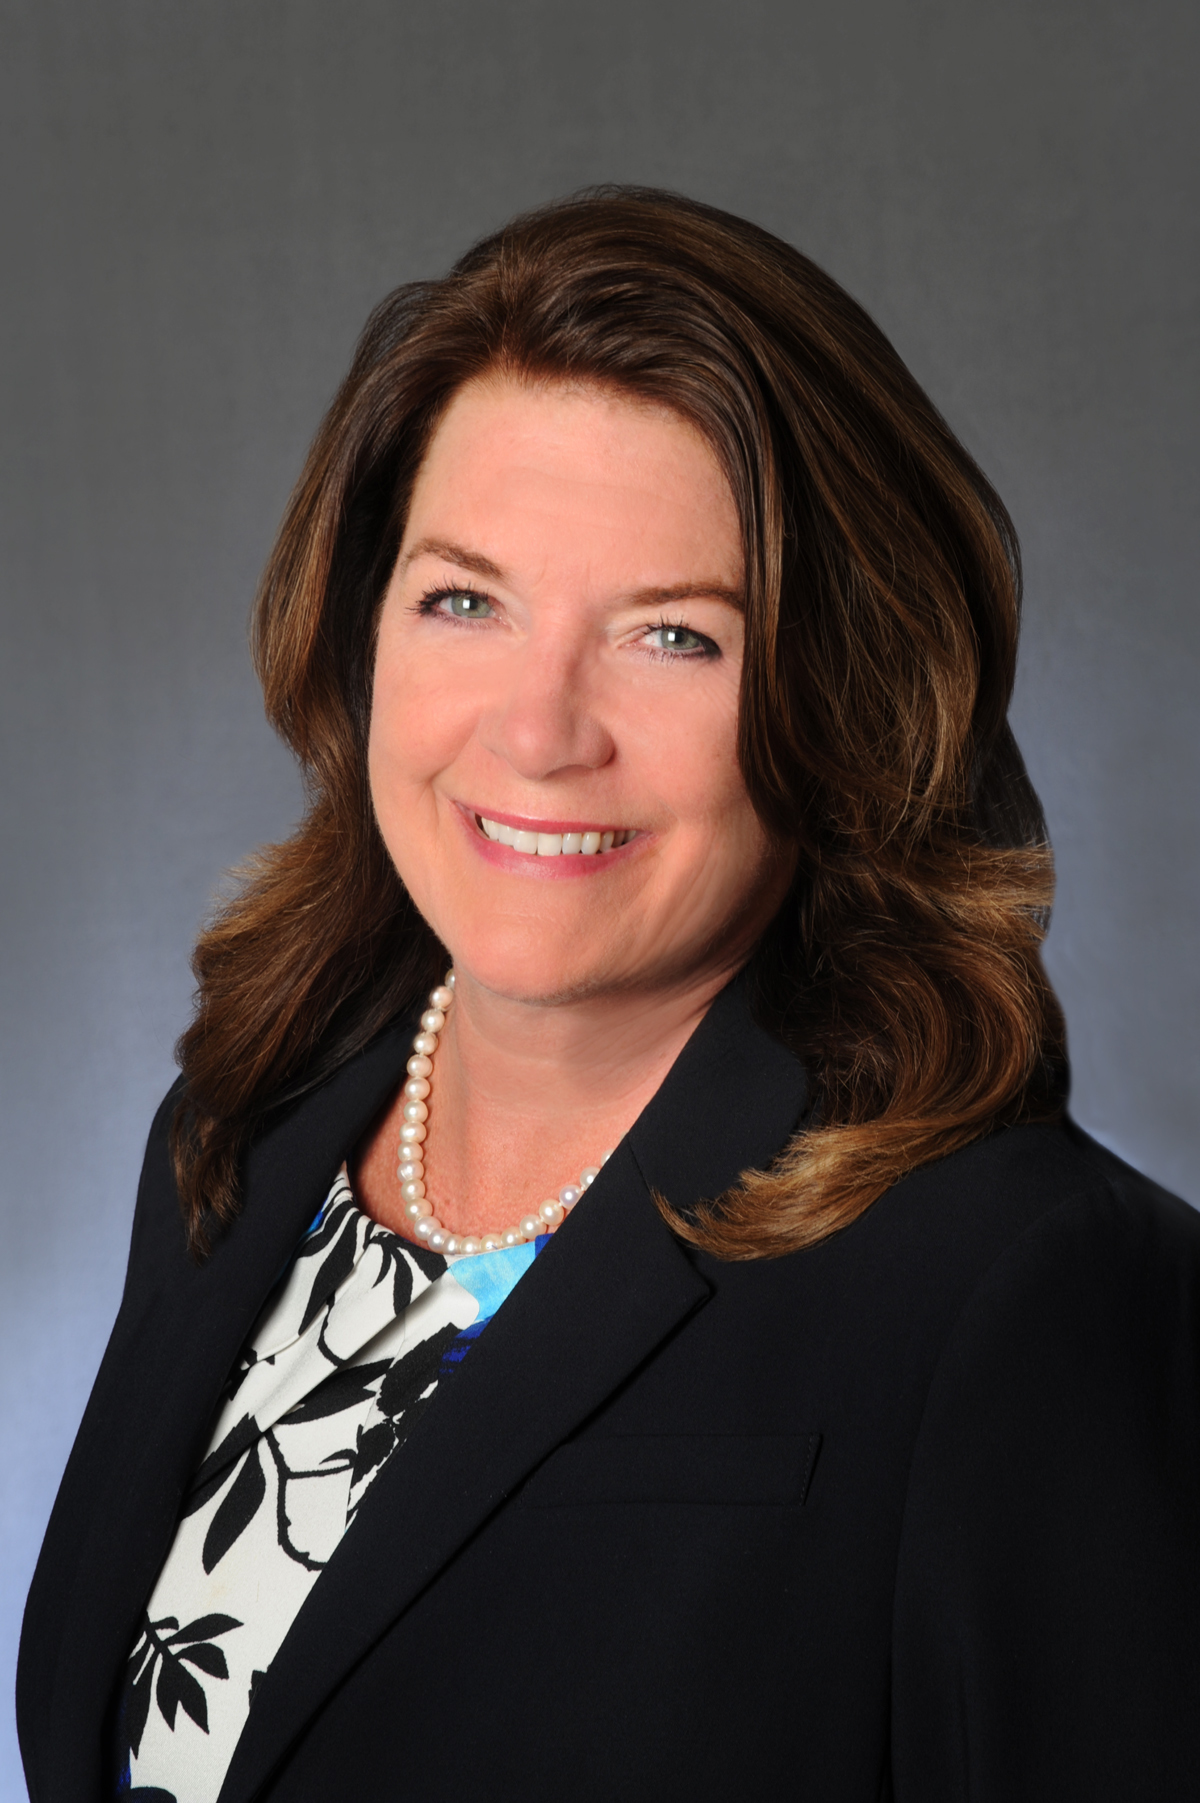 Courtesy. Roseanne Gutmann, SHRM-SCP, SPHR, was announced as the new human resources director at CenterPlace Health.